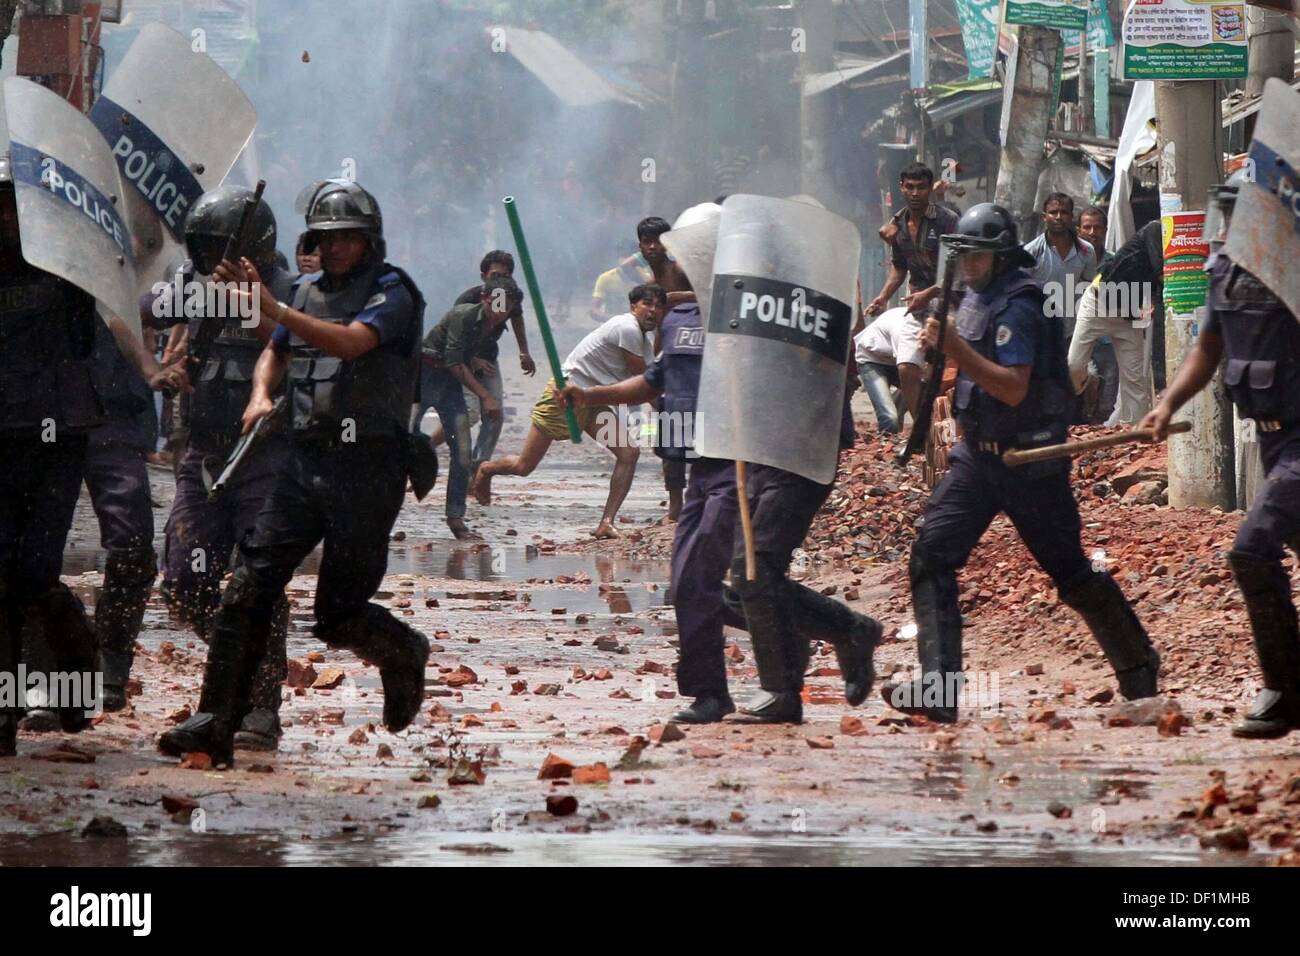 Narayanganj, Bangladesh. 26th Sep, 2013. Bangladeshi police officials take cover as striking garment workers throw stones during a protest in Narayanganj on September 26, 2013. Most Bangladesh garment factories have reopened after five days of violent protests over wage hikes for textile workers, after the government vowed to crack down on the unrest 'with all force . Stock Photo